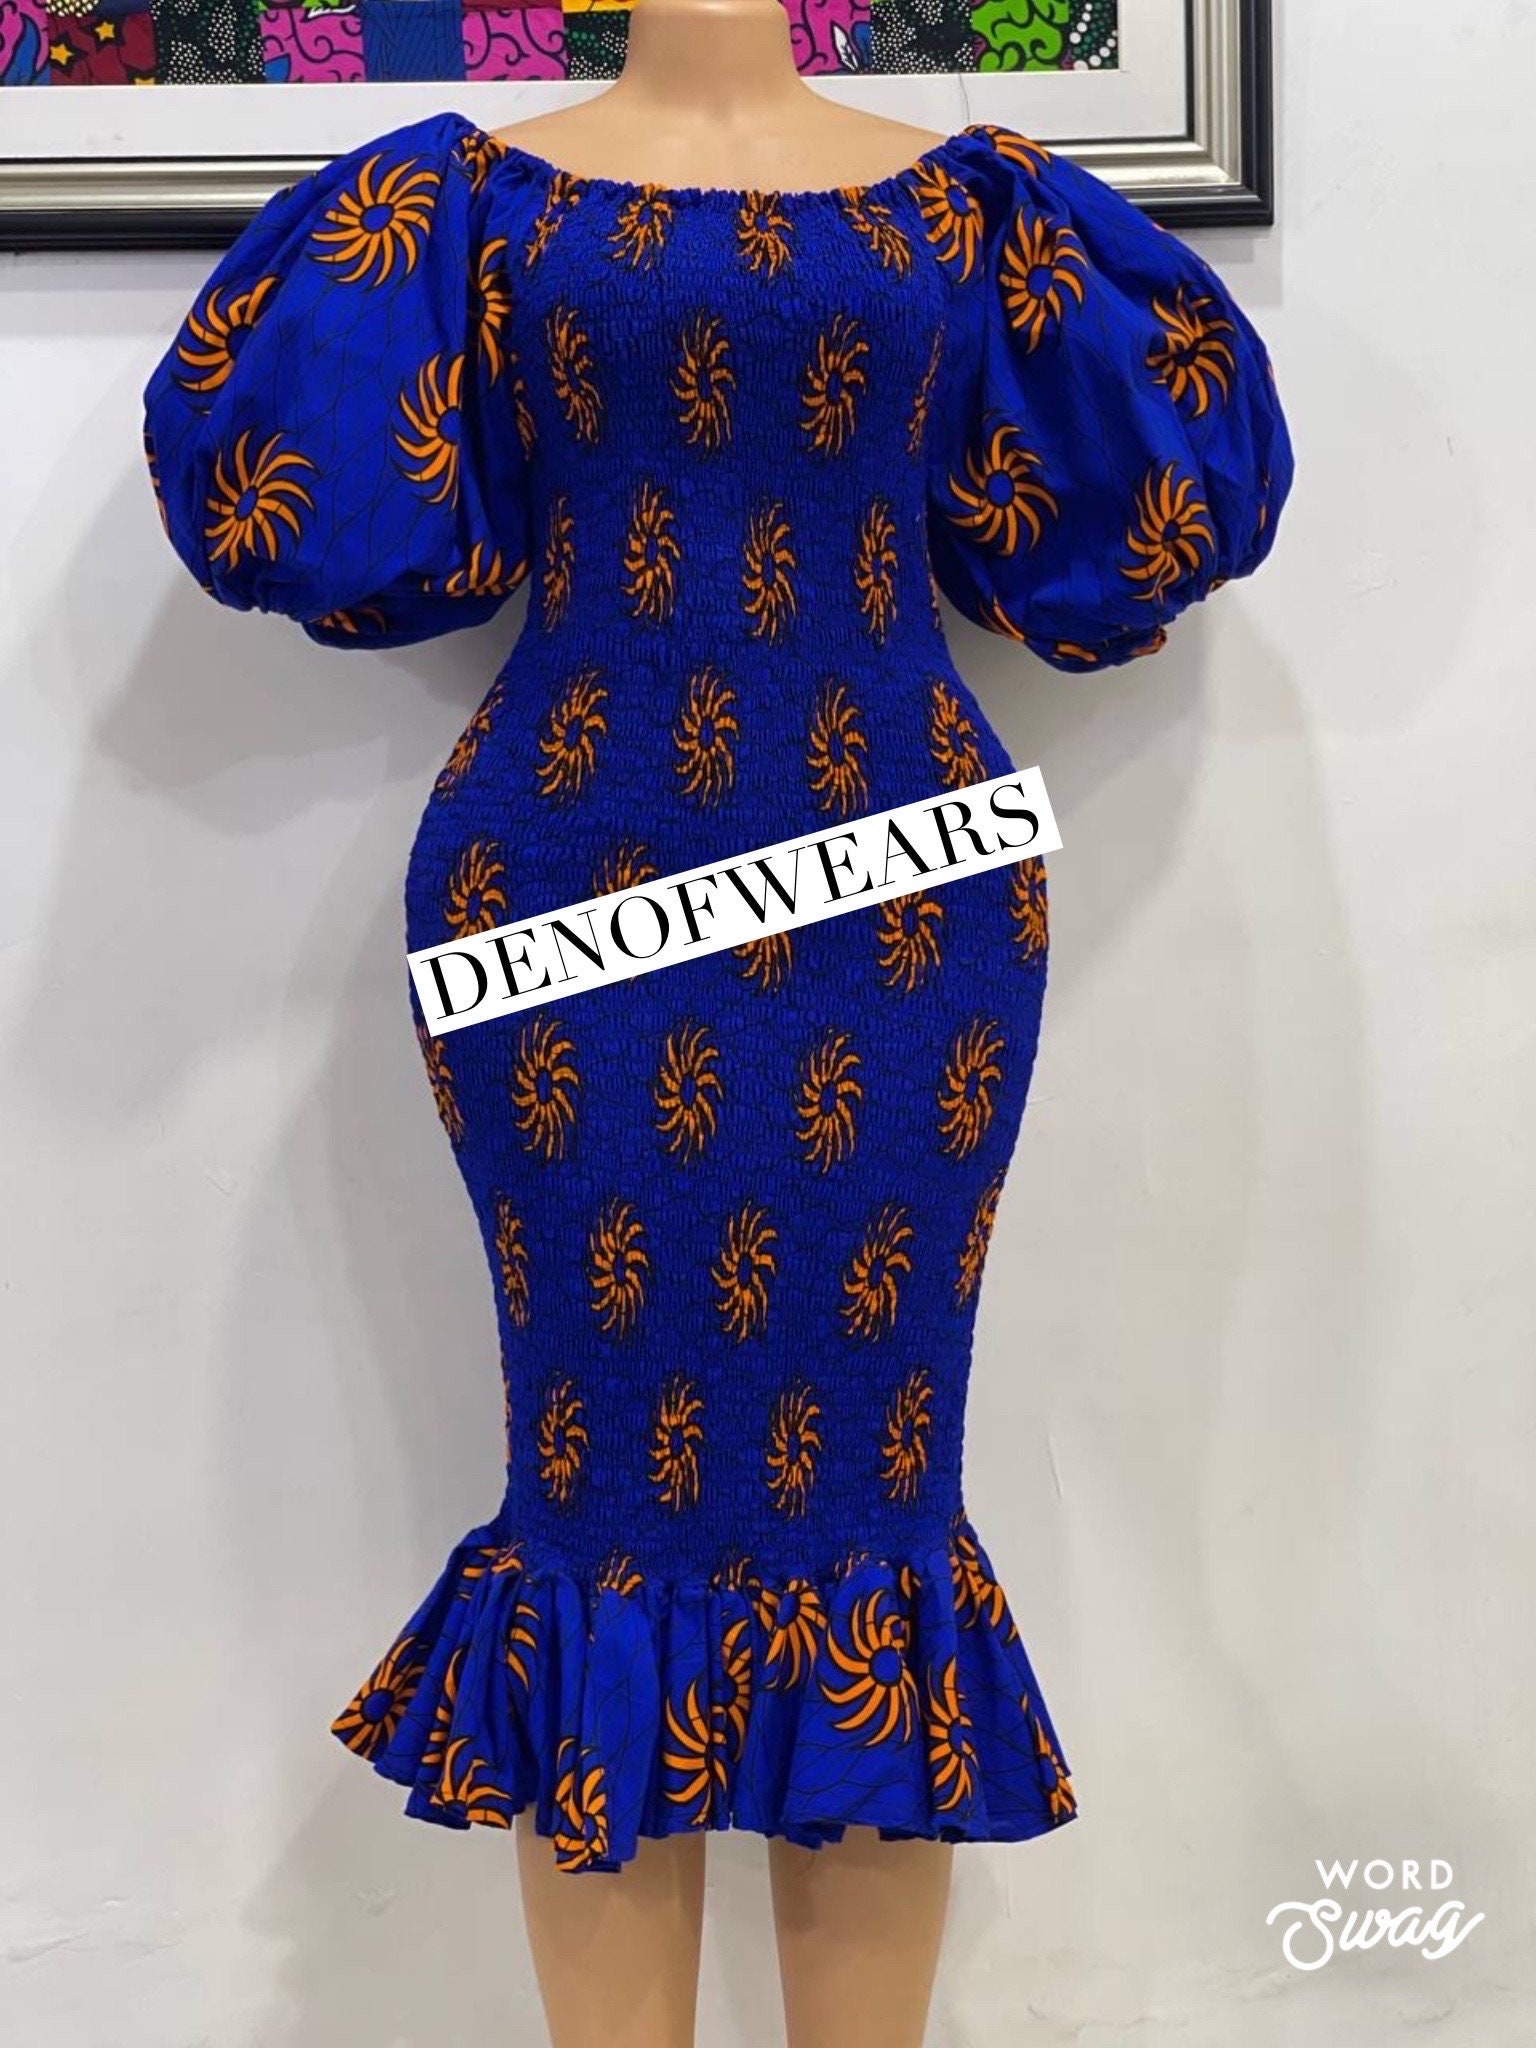 Show Stopper! African Ankara Dresses That Will Make You Stand Out •  Exquisite Magazine - Fashion, Beauty And Lifestyle